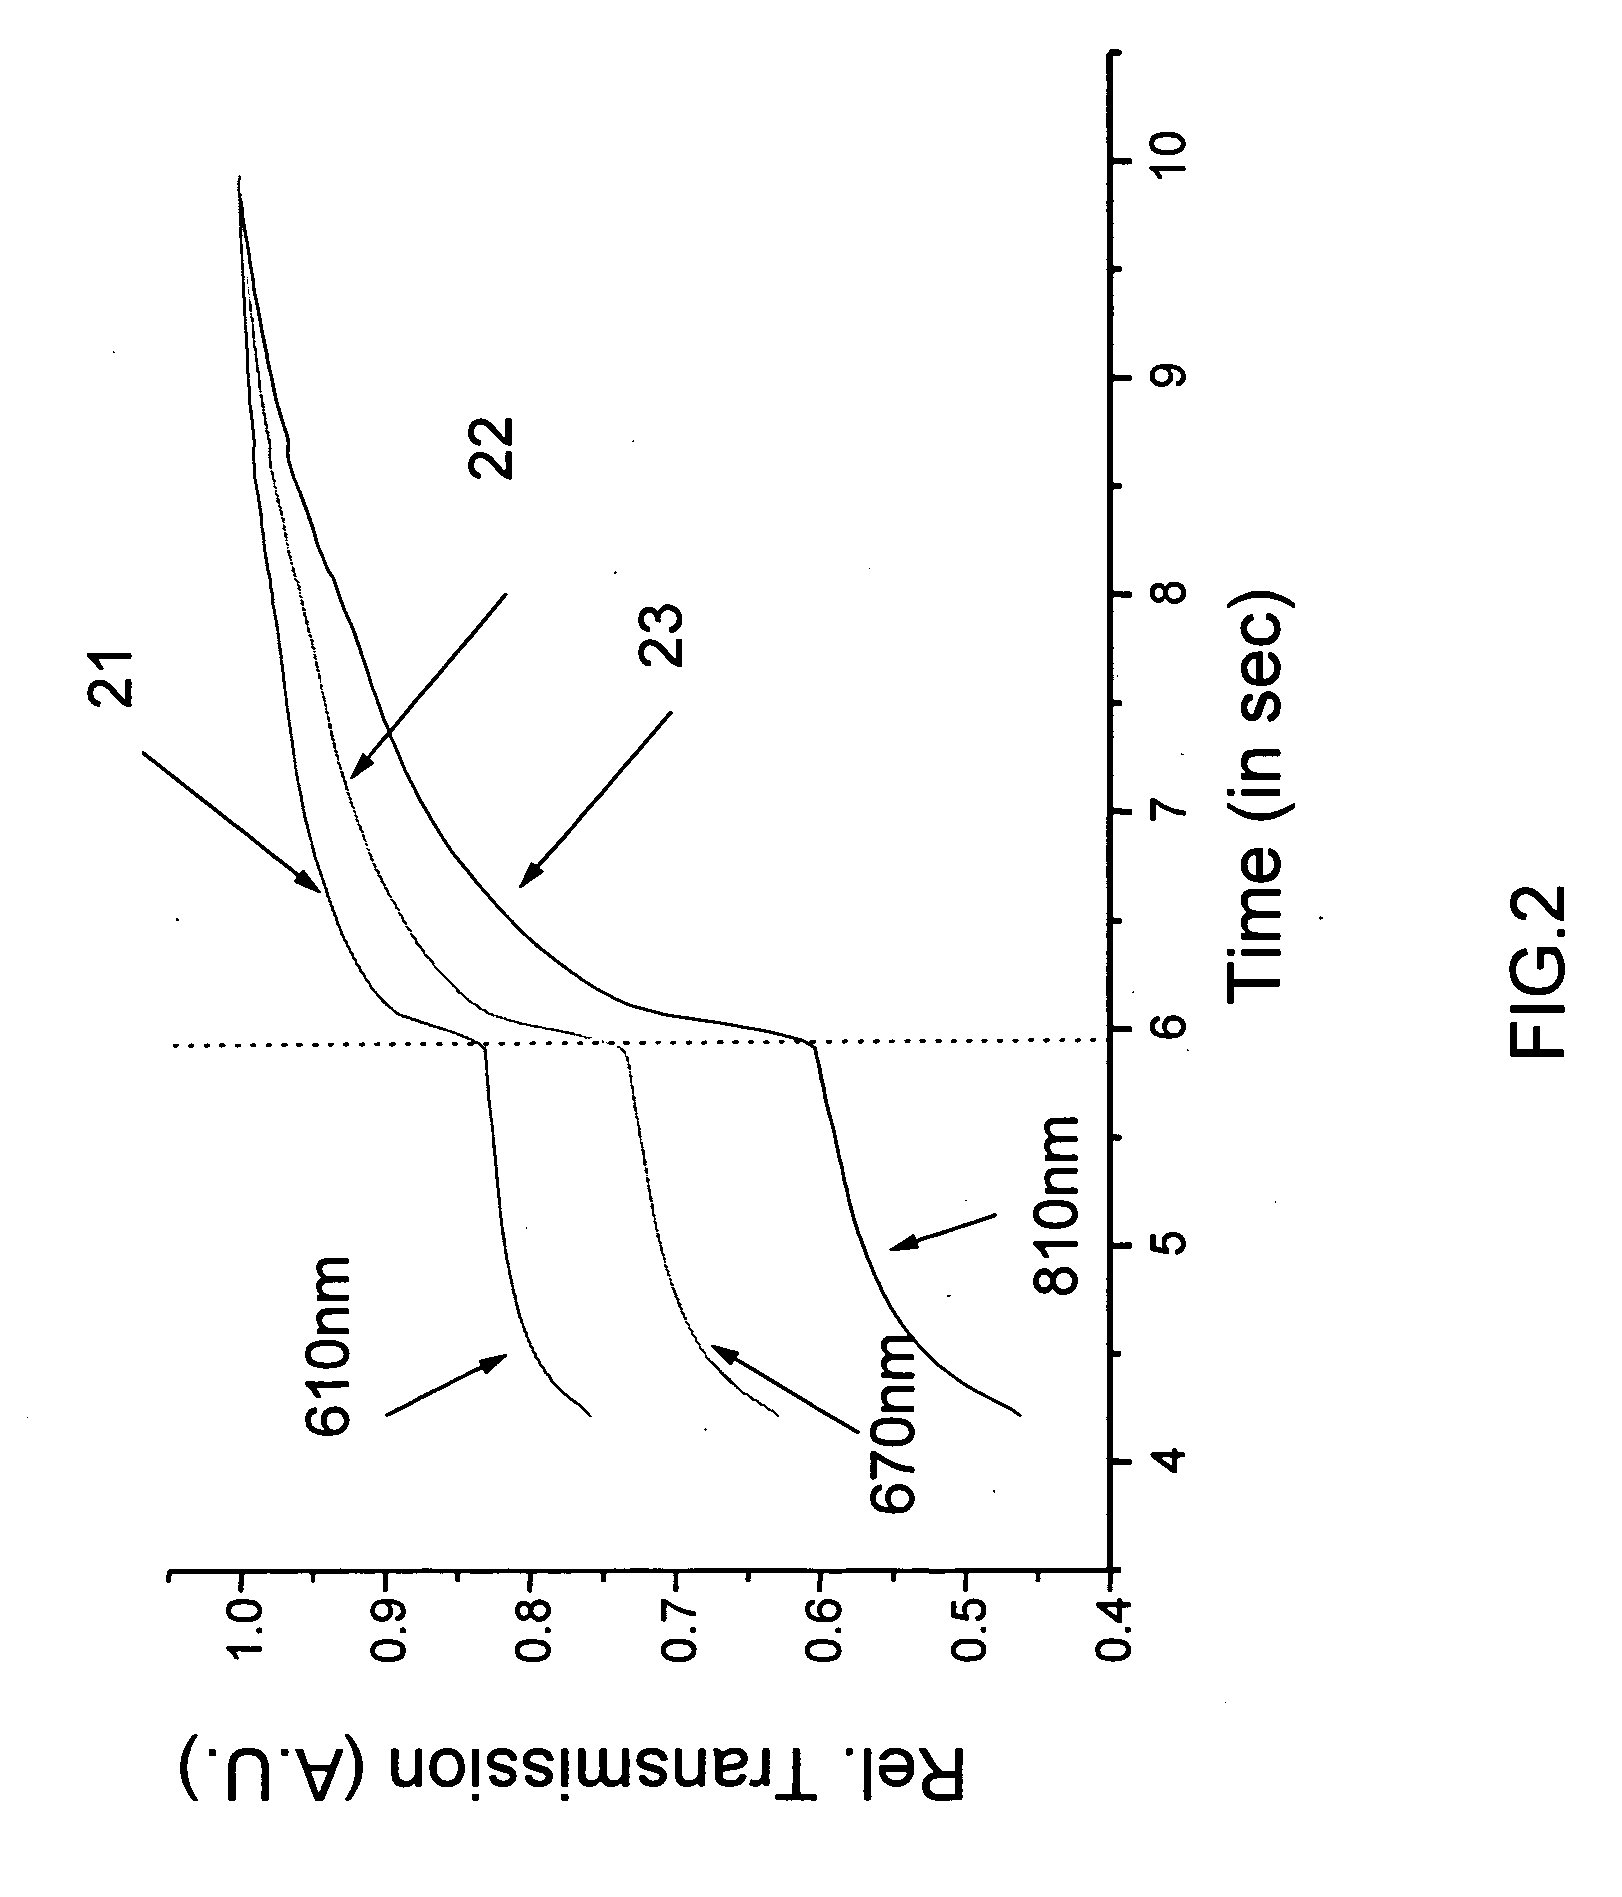 Method and system for use in non-invasive optical measurements of blood parameters